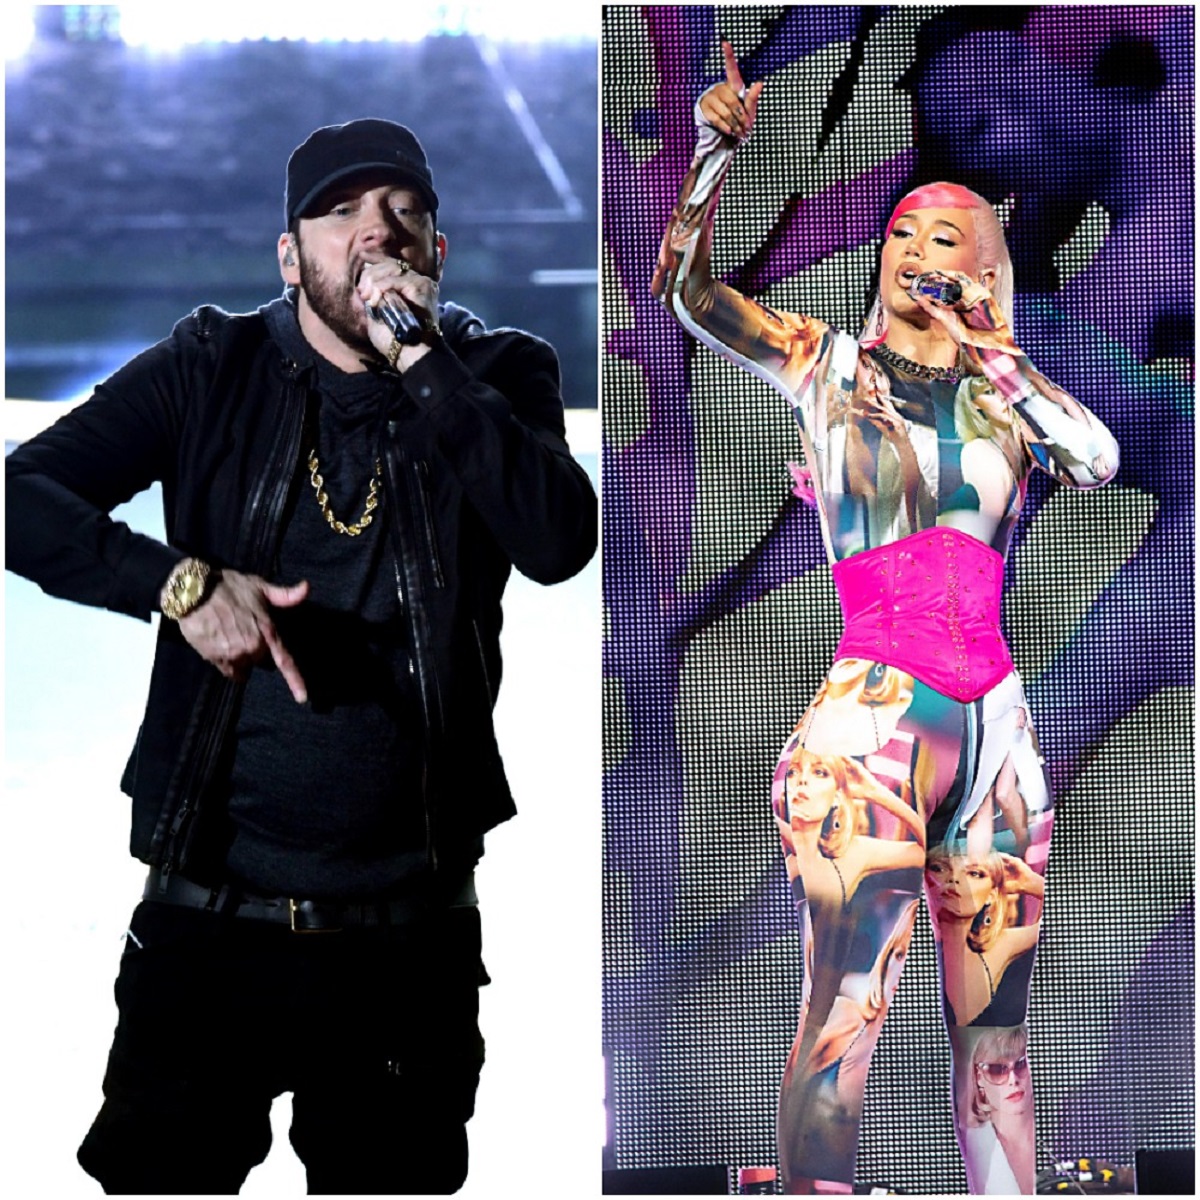 (L) Eminem at the 92nd Annual Academy Awards, (R) Rapper Iggy Azalea performing onstage